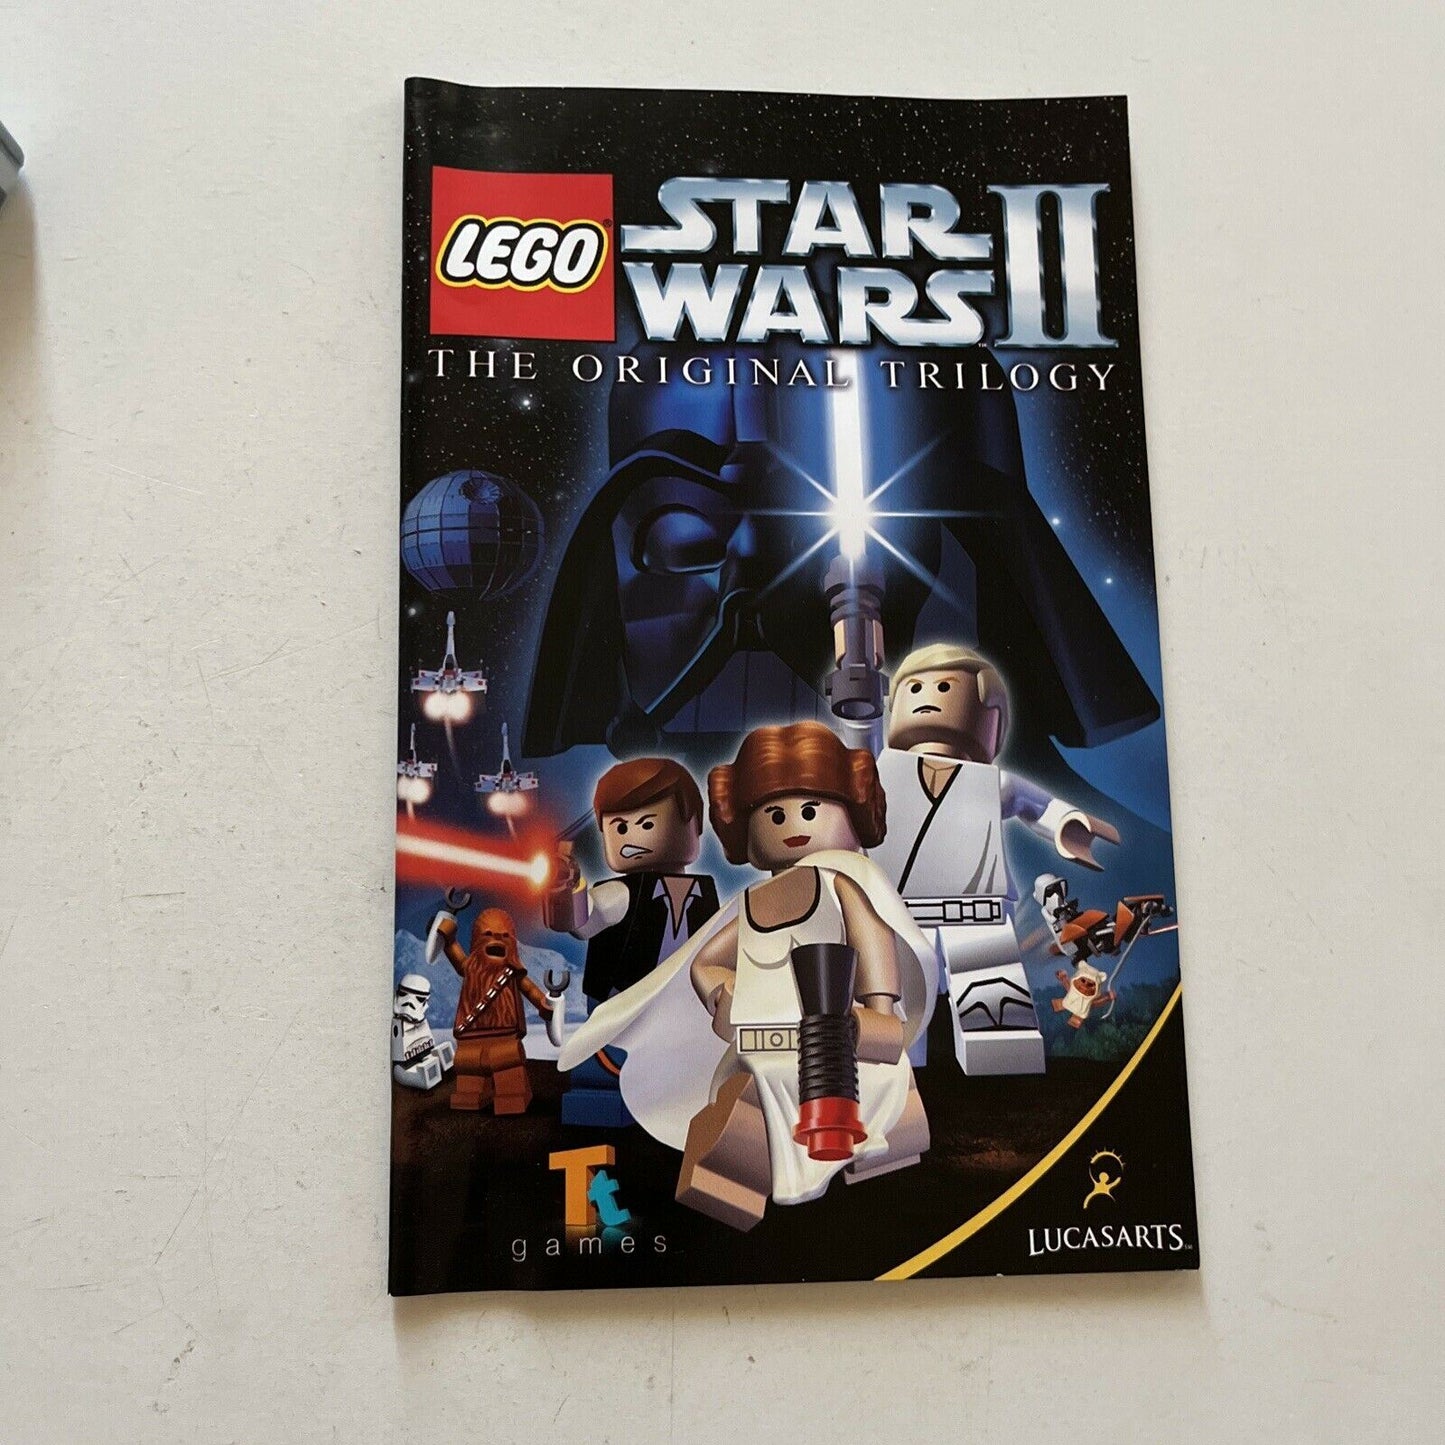 Lego Star Wars II - The Original Trilogy PS2 Playstation 2 PAL With Manual